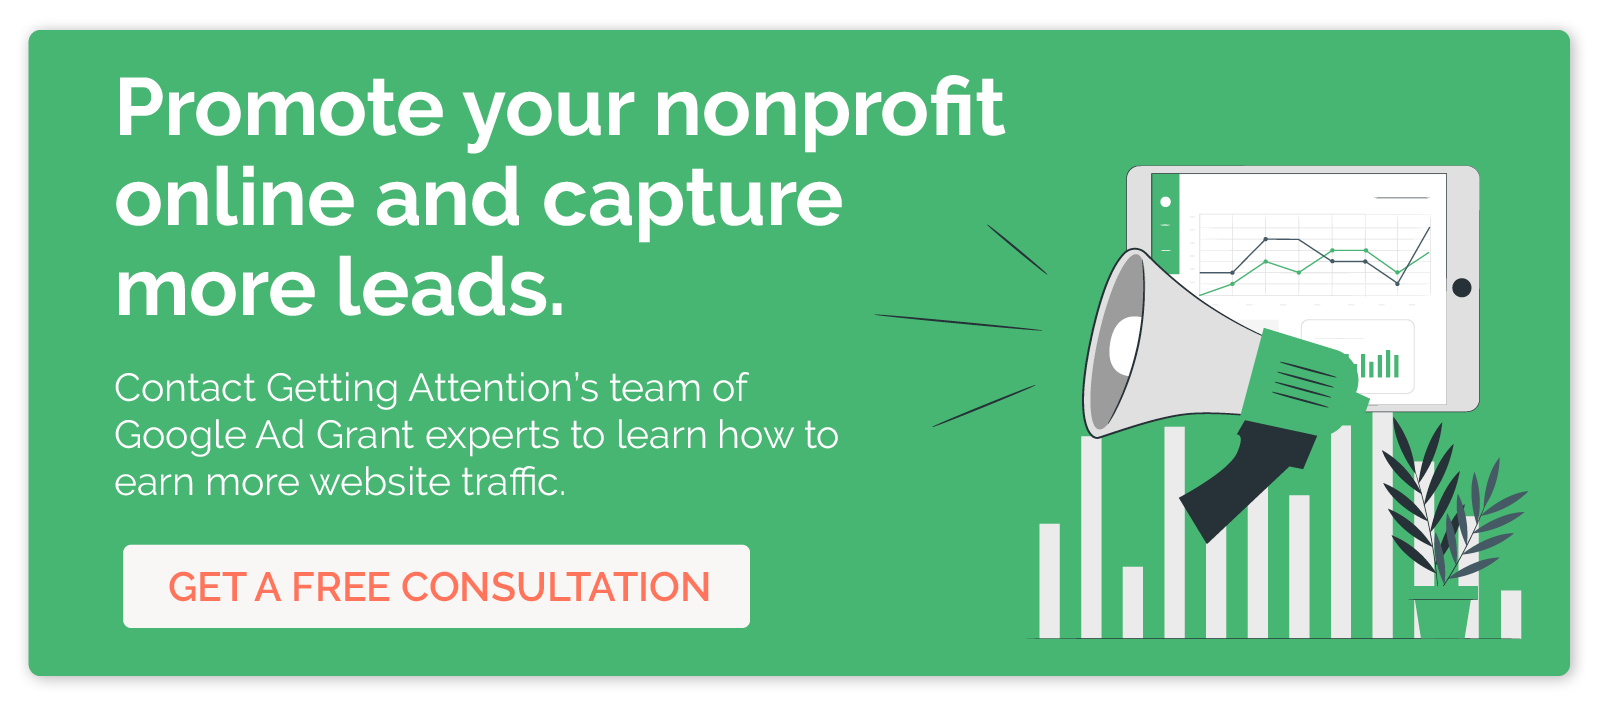 Promote your nonprofit online and capture more leads. Contact Getting Attention's team of Google Ad Grant to learn how you can earn more website traffic. Get a free consultation. 